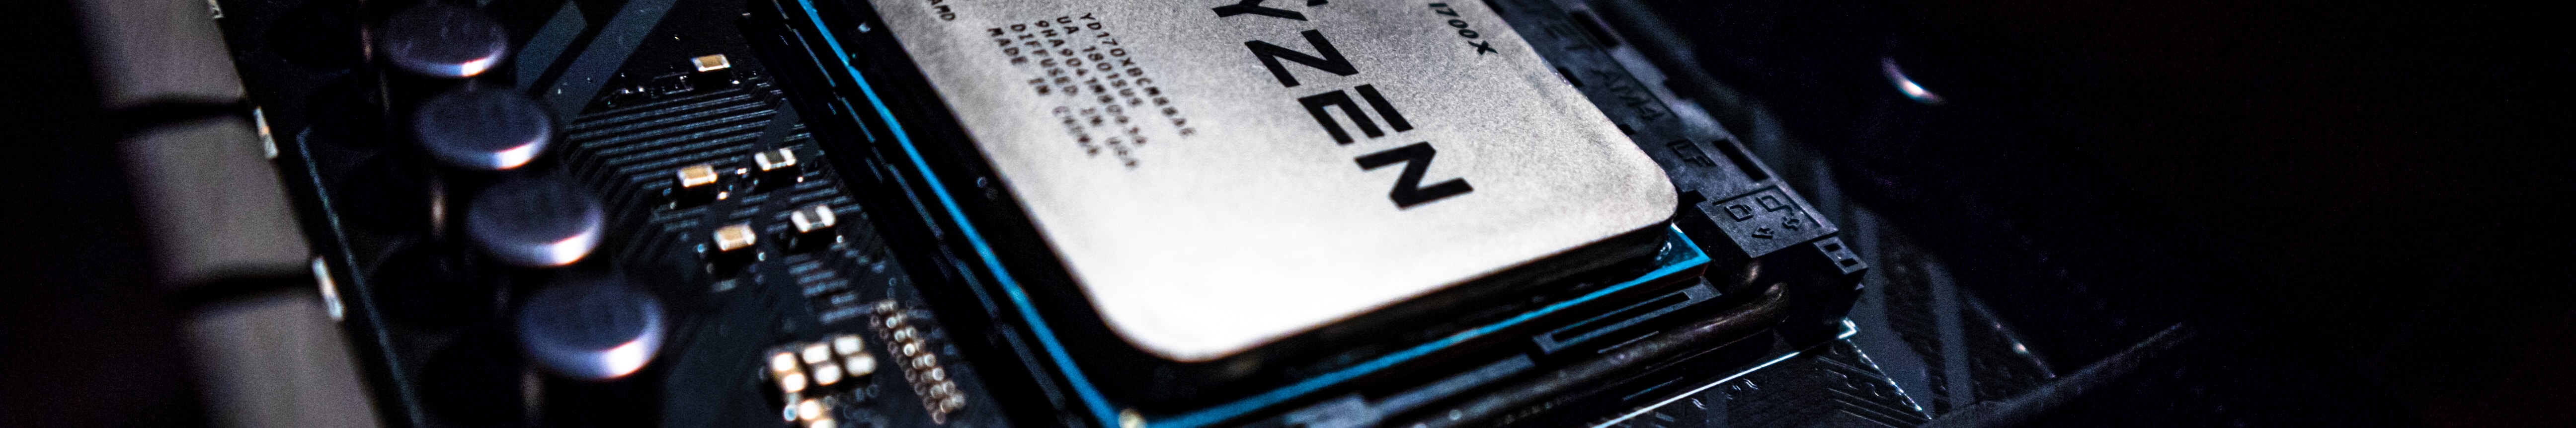 AMD's processors sold in 2014 amount to about 10,100 tones of e-waste in 2022